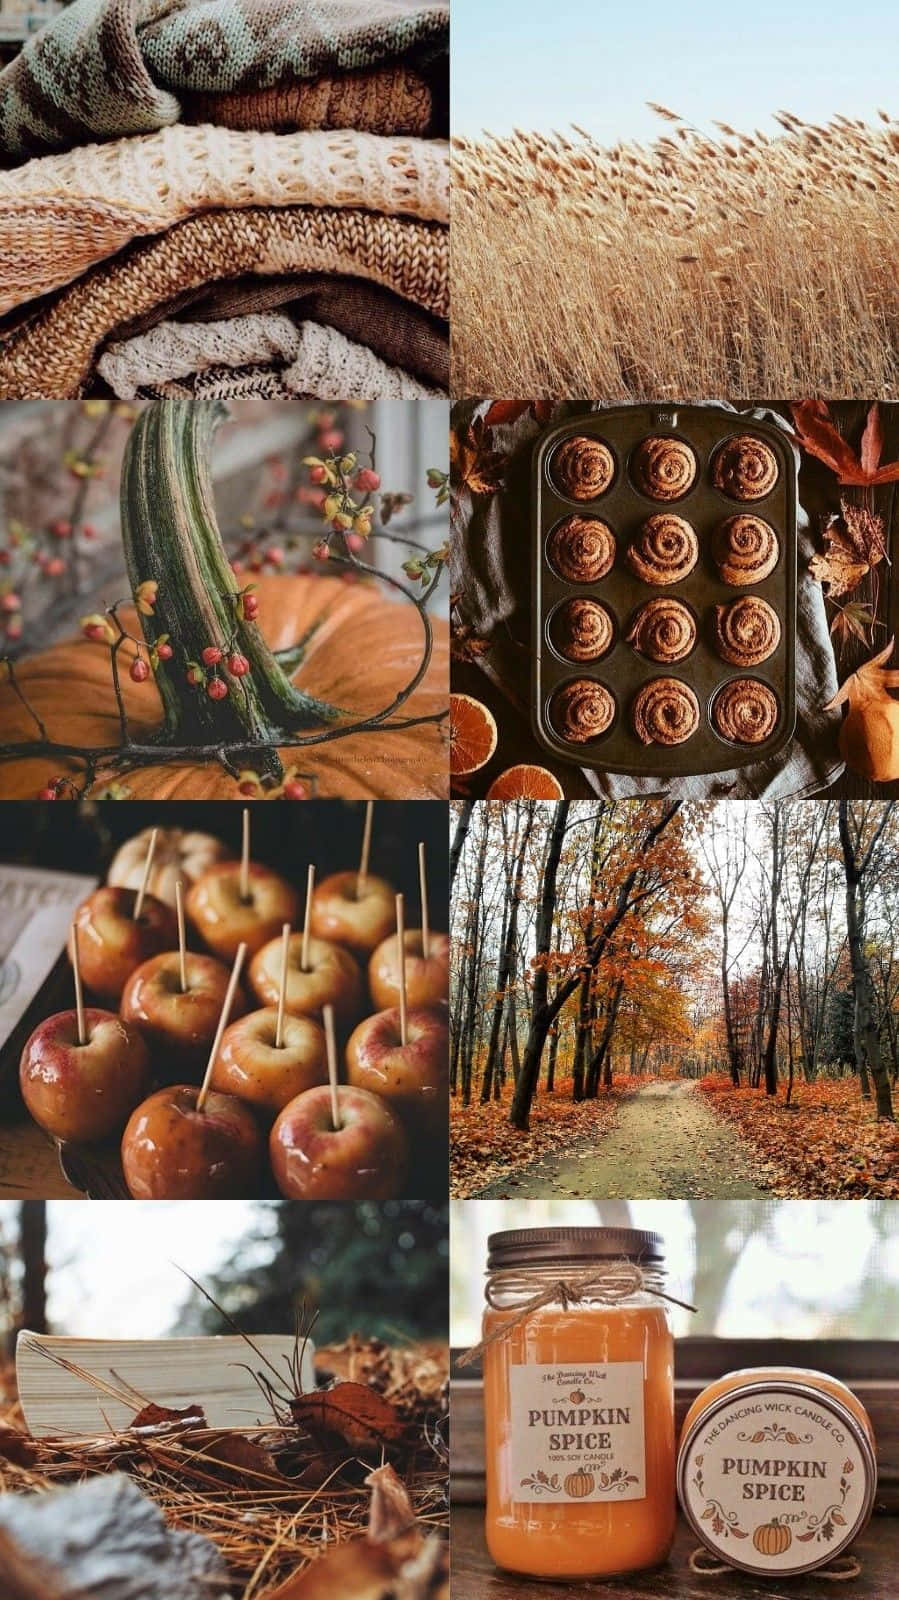 Enjoy the autumn season with a seasonal collage of fall leaves, pumpkins and squirrels. Wallpaper